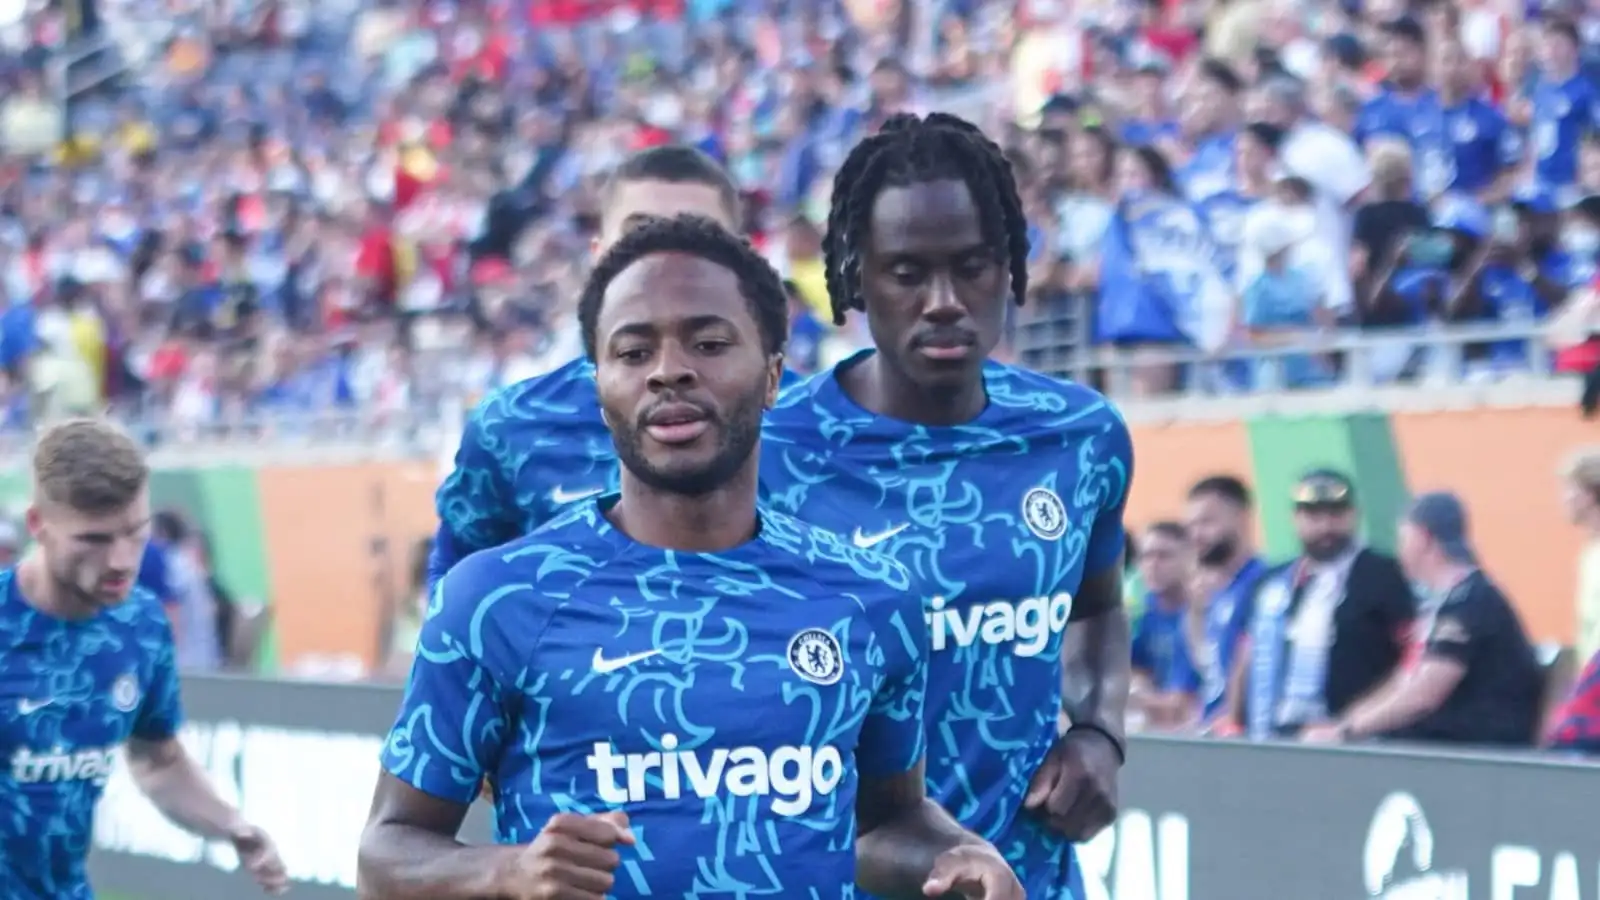 Raheem Sterling and Trevoh Chalobah, Chelsea